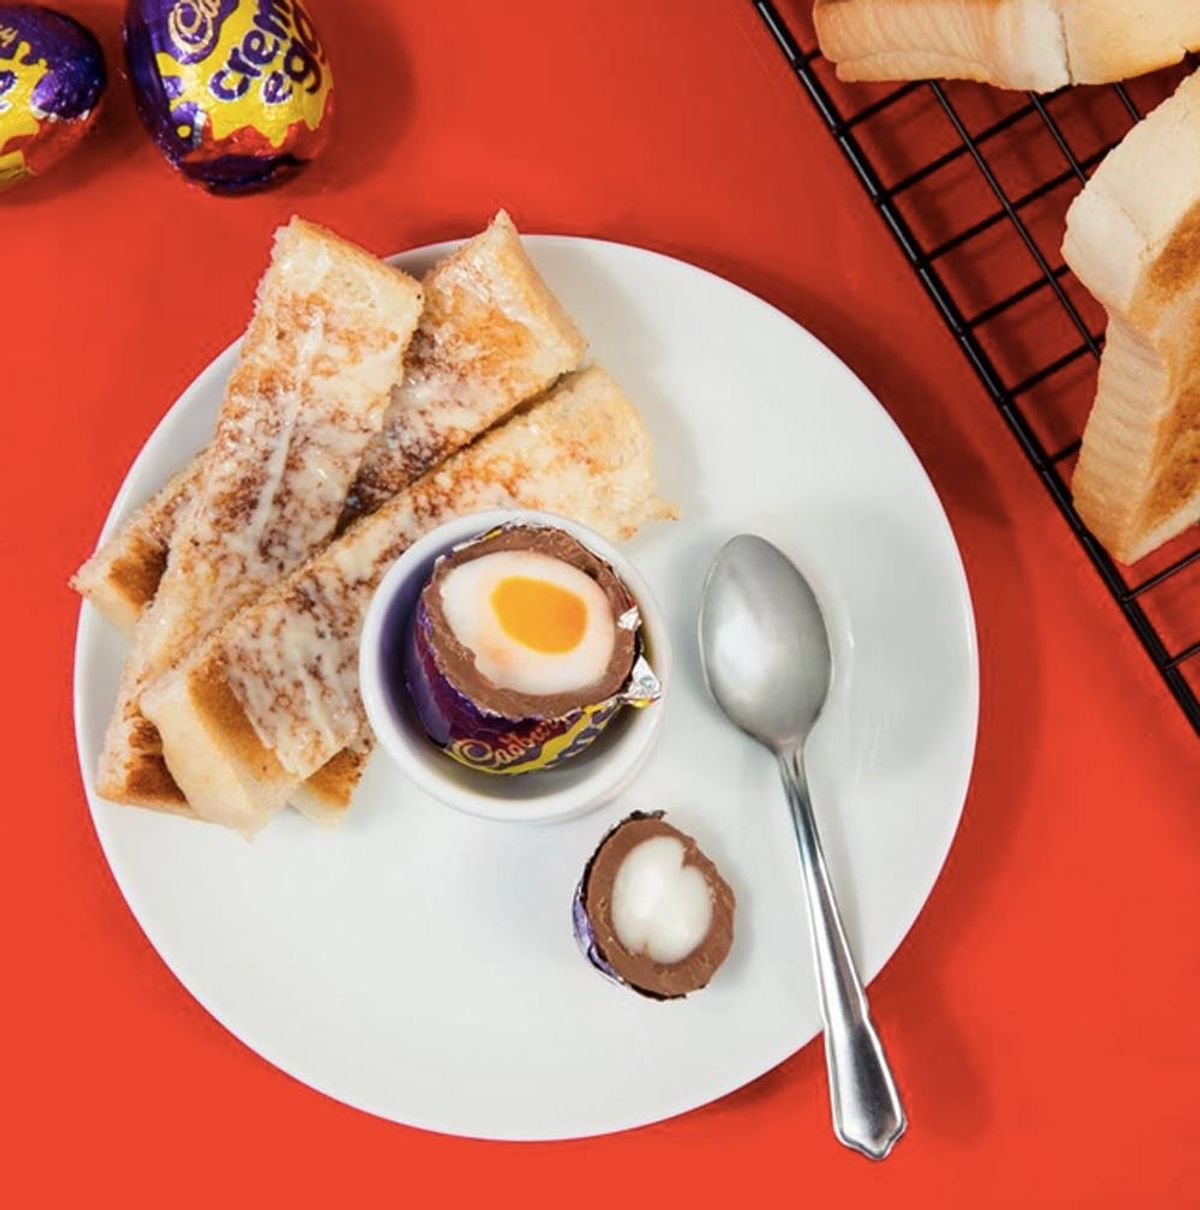 The Cadbury Creme Egg Cafe Is Making Your Easter Dreams Come True